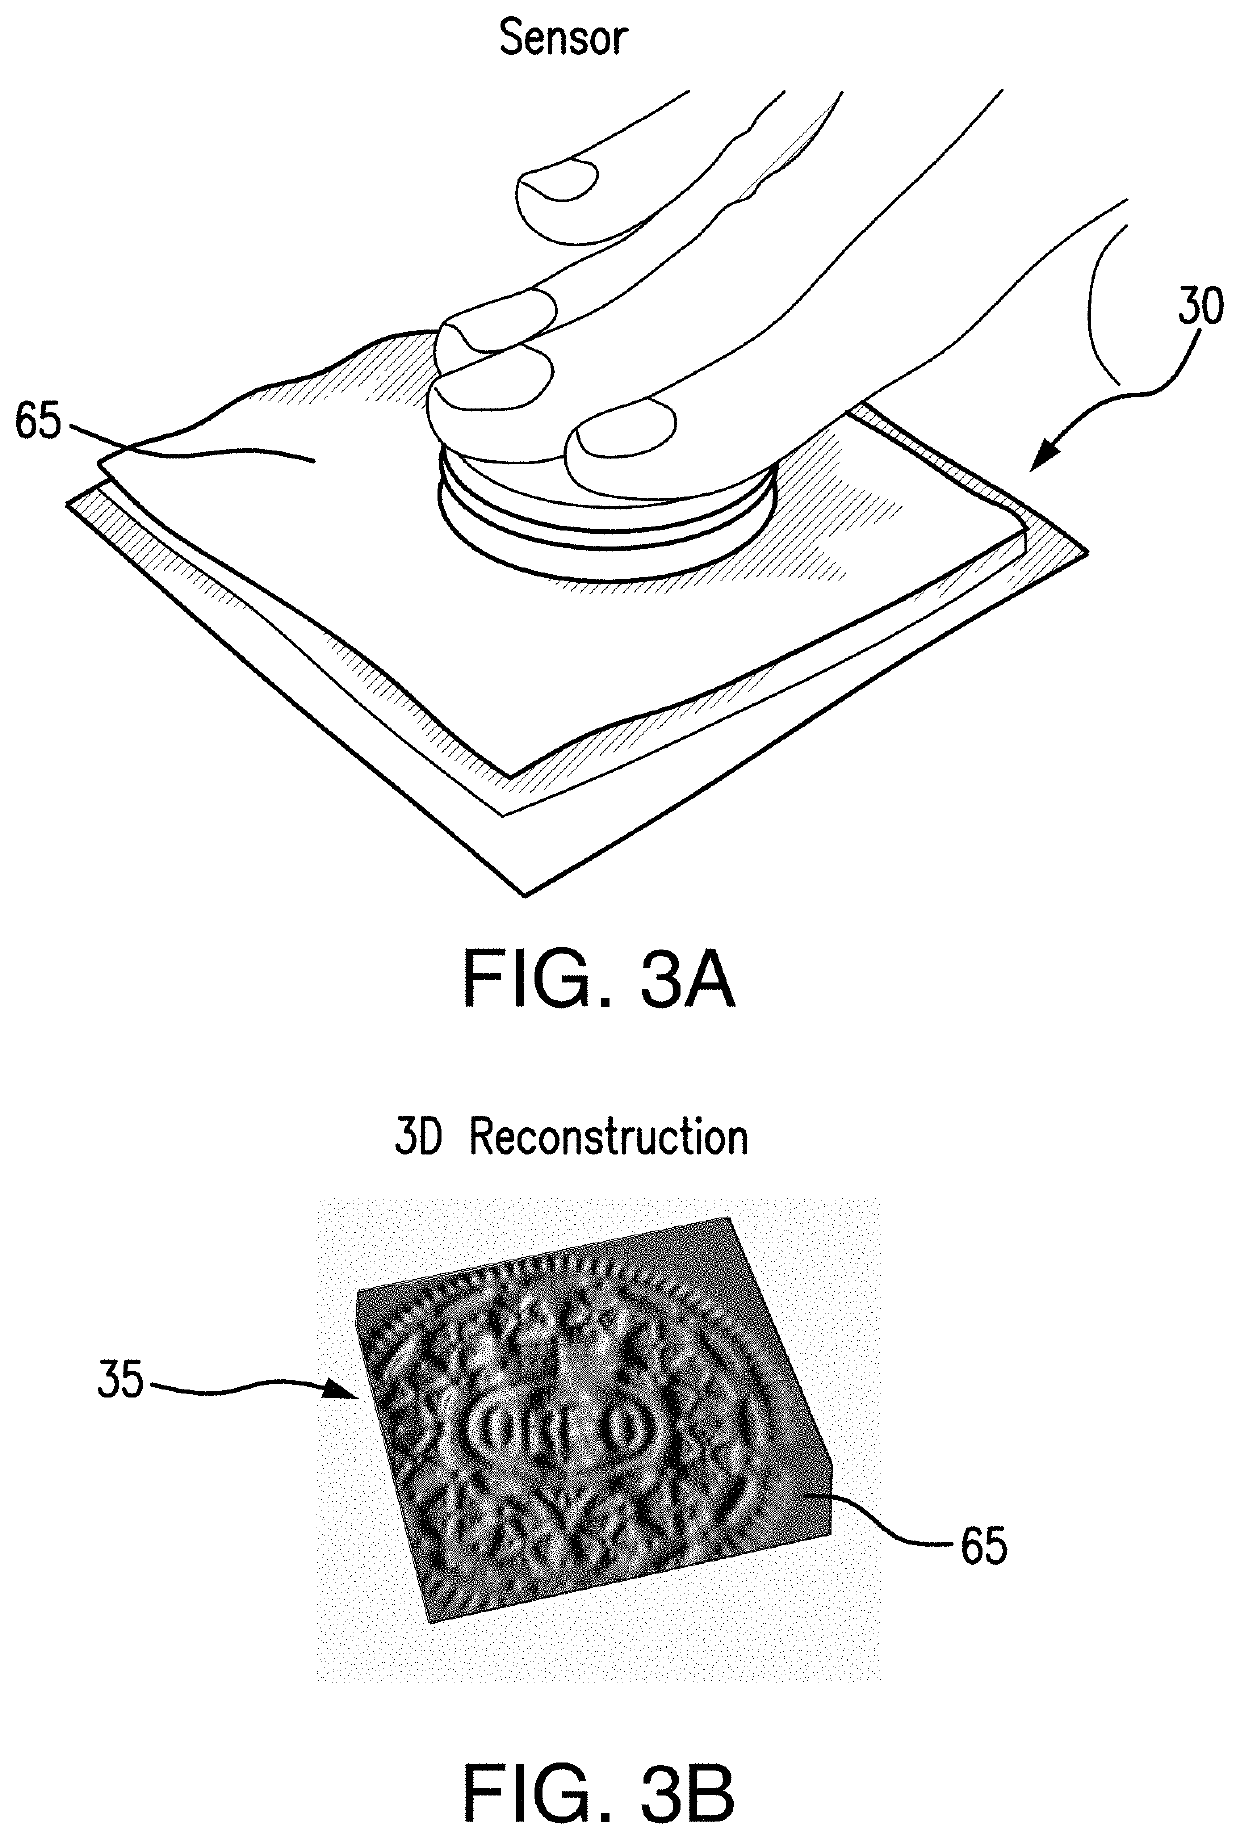 Illuminated Surface as Light Source for In-Hand Object Location System